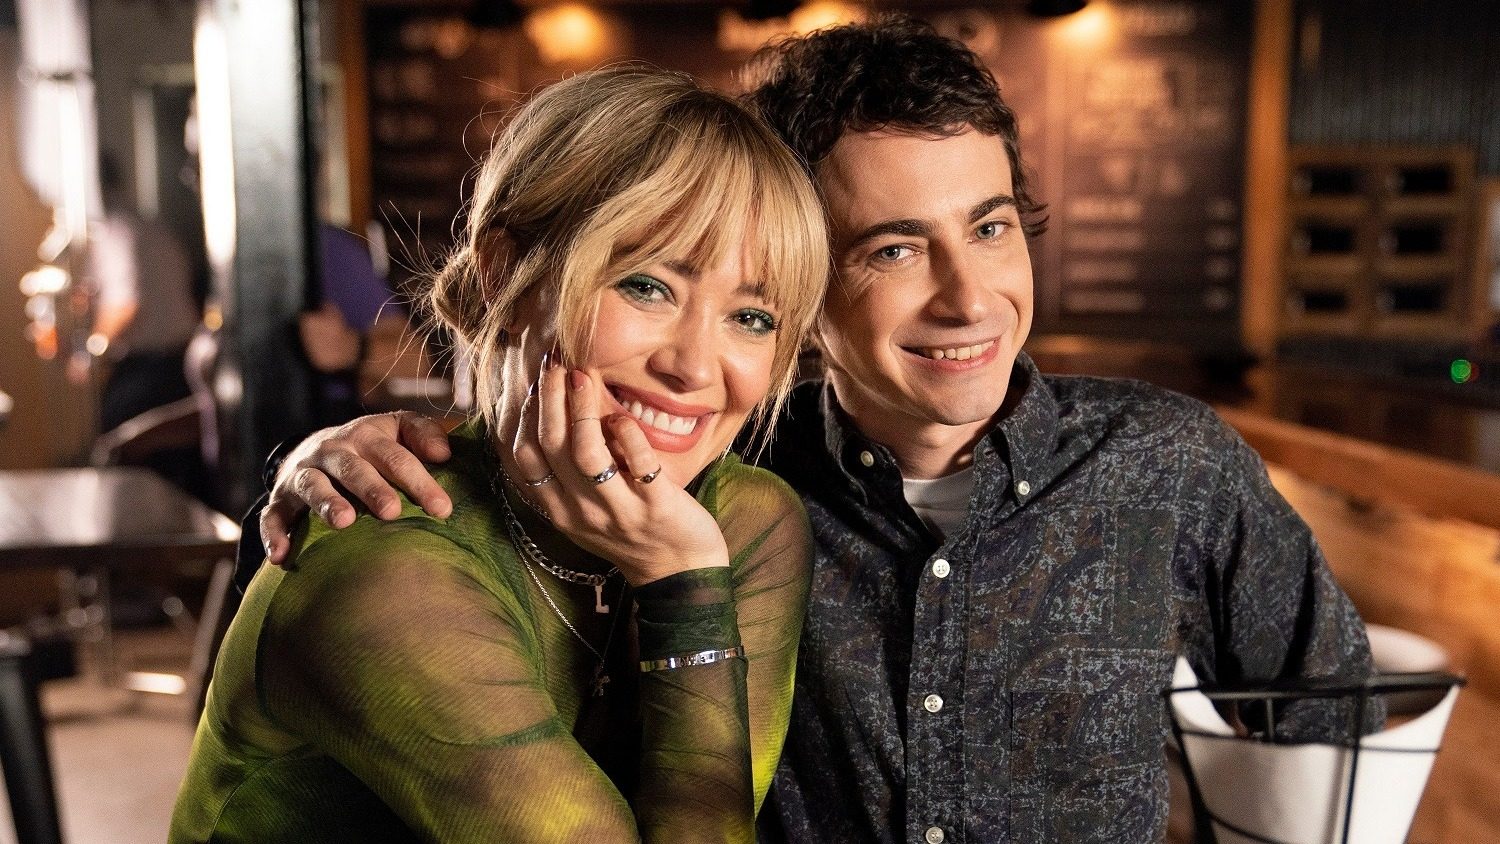 Best friends forever: Adam Lamberg joins Hilary Duff in new ‘Lizzie McGuire’ series